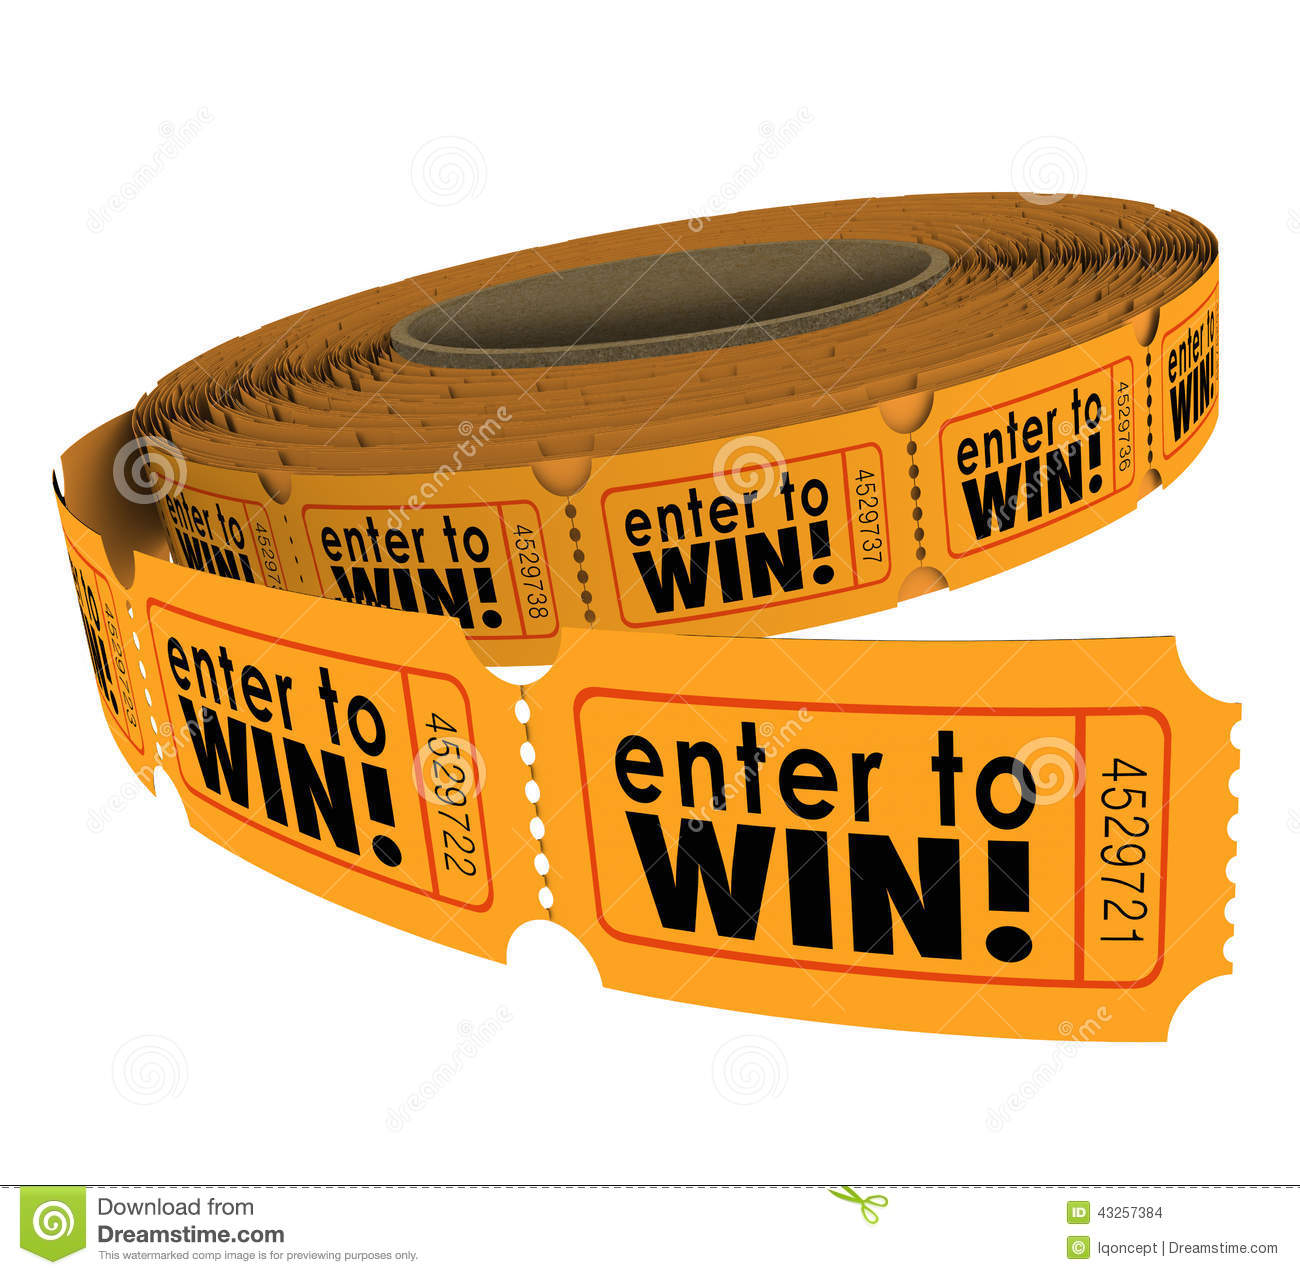 Enter To Win Words On A Roll Of Orange Raffle Or Lotter Tickets As A